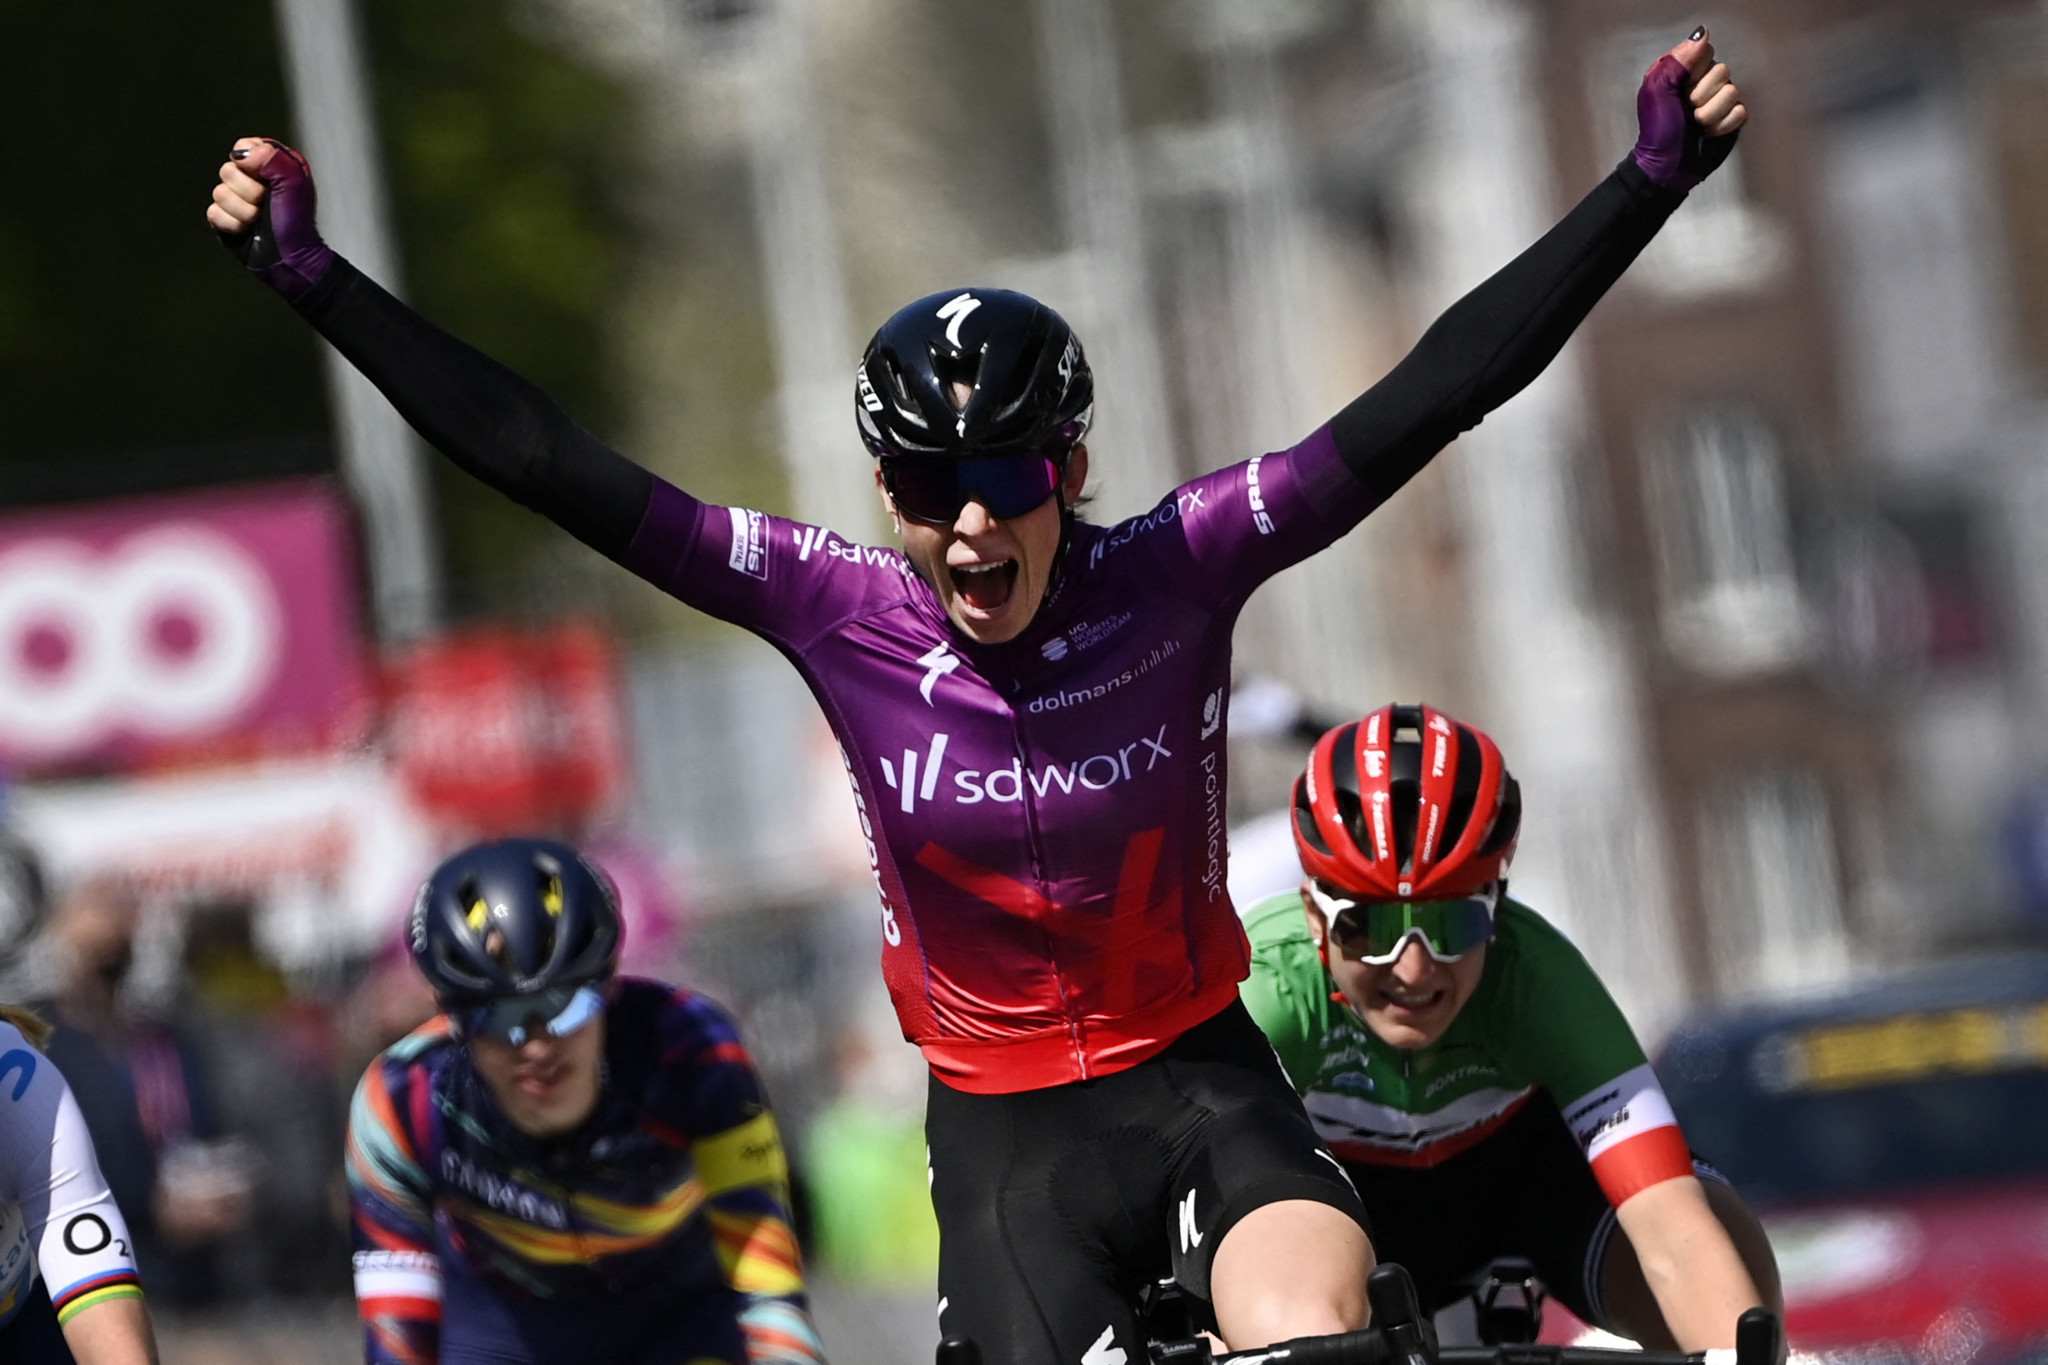 Vollering secures final stage of Vuelta a Burgos Féminas as Labous wins overall title